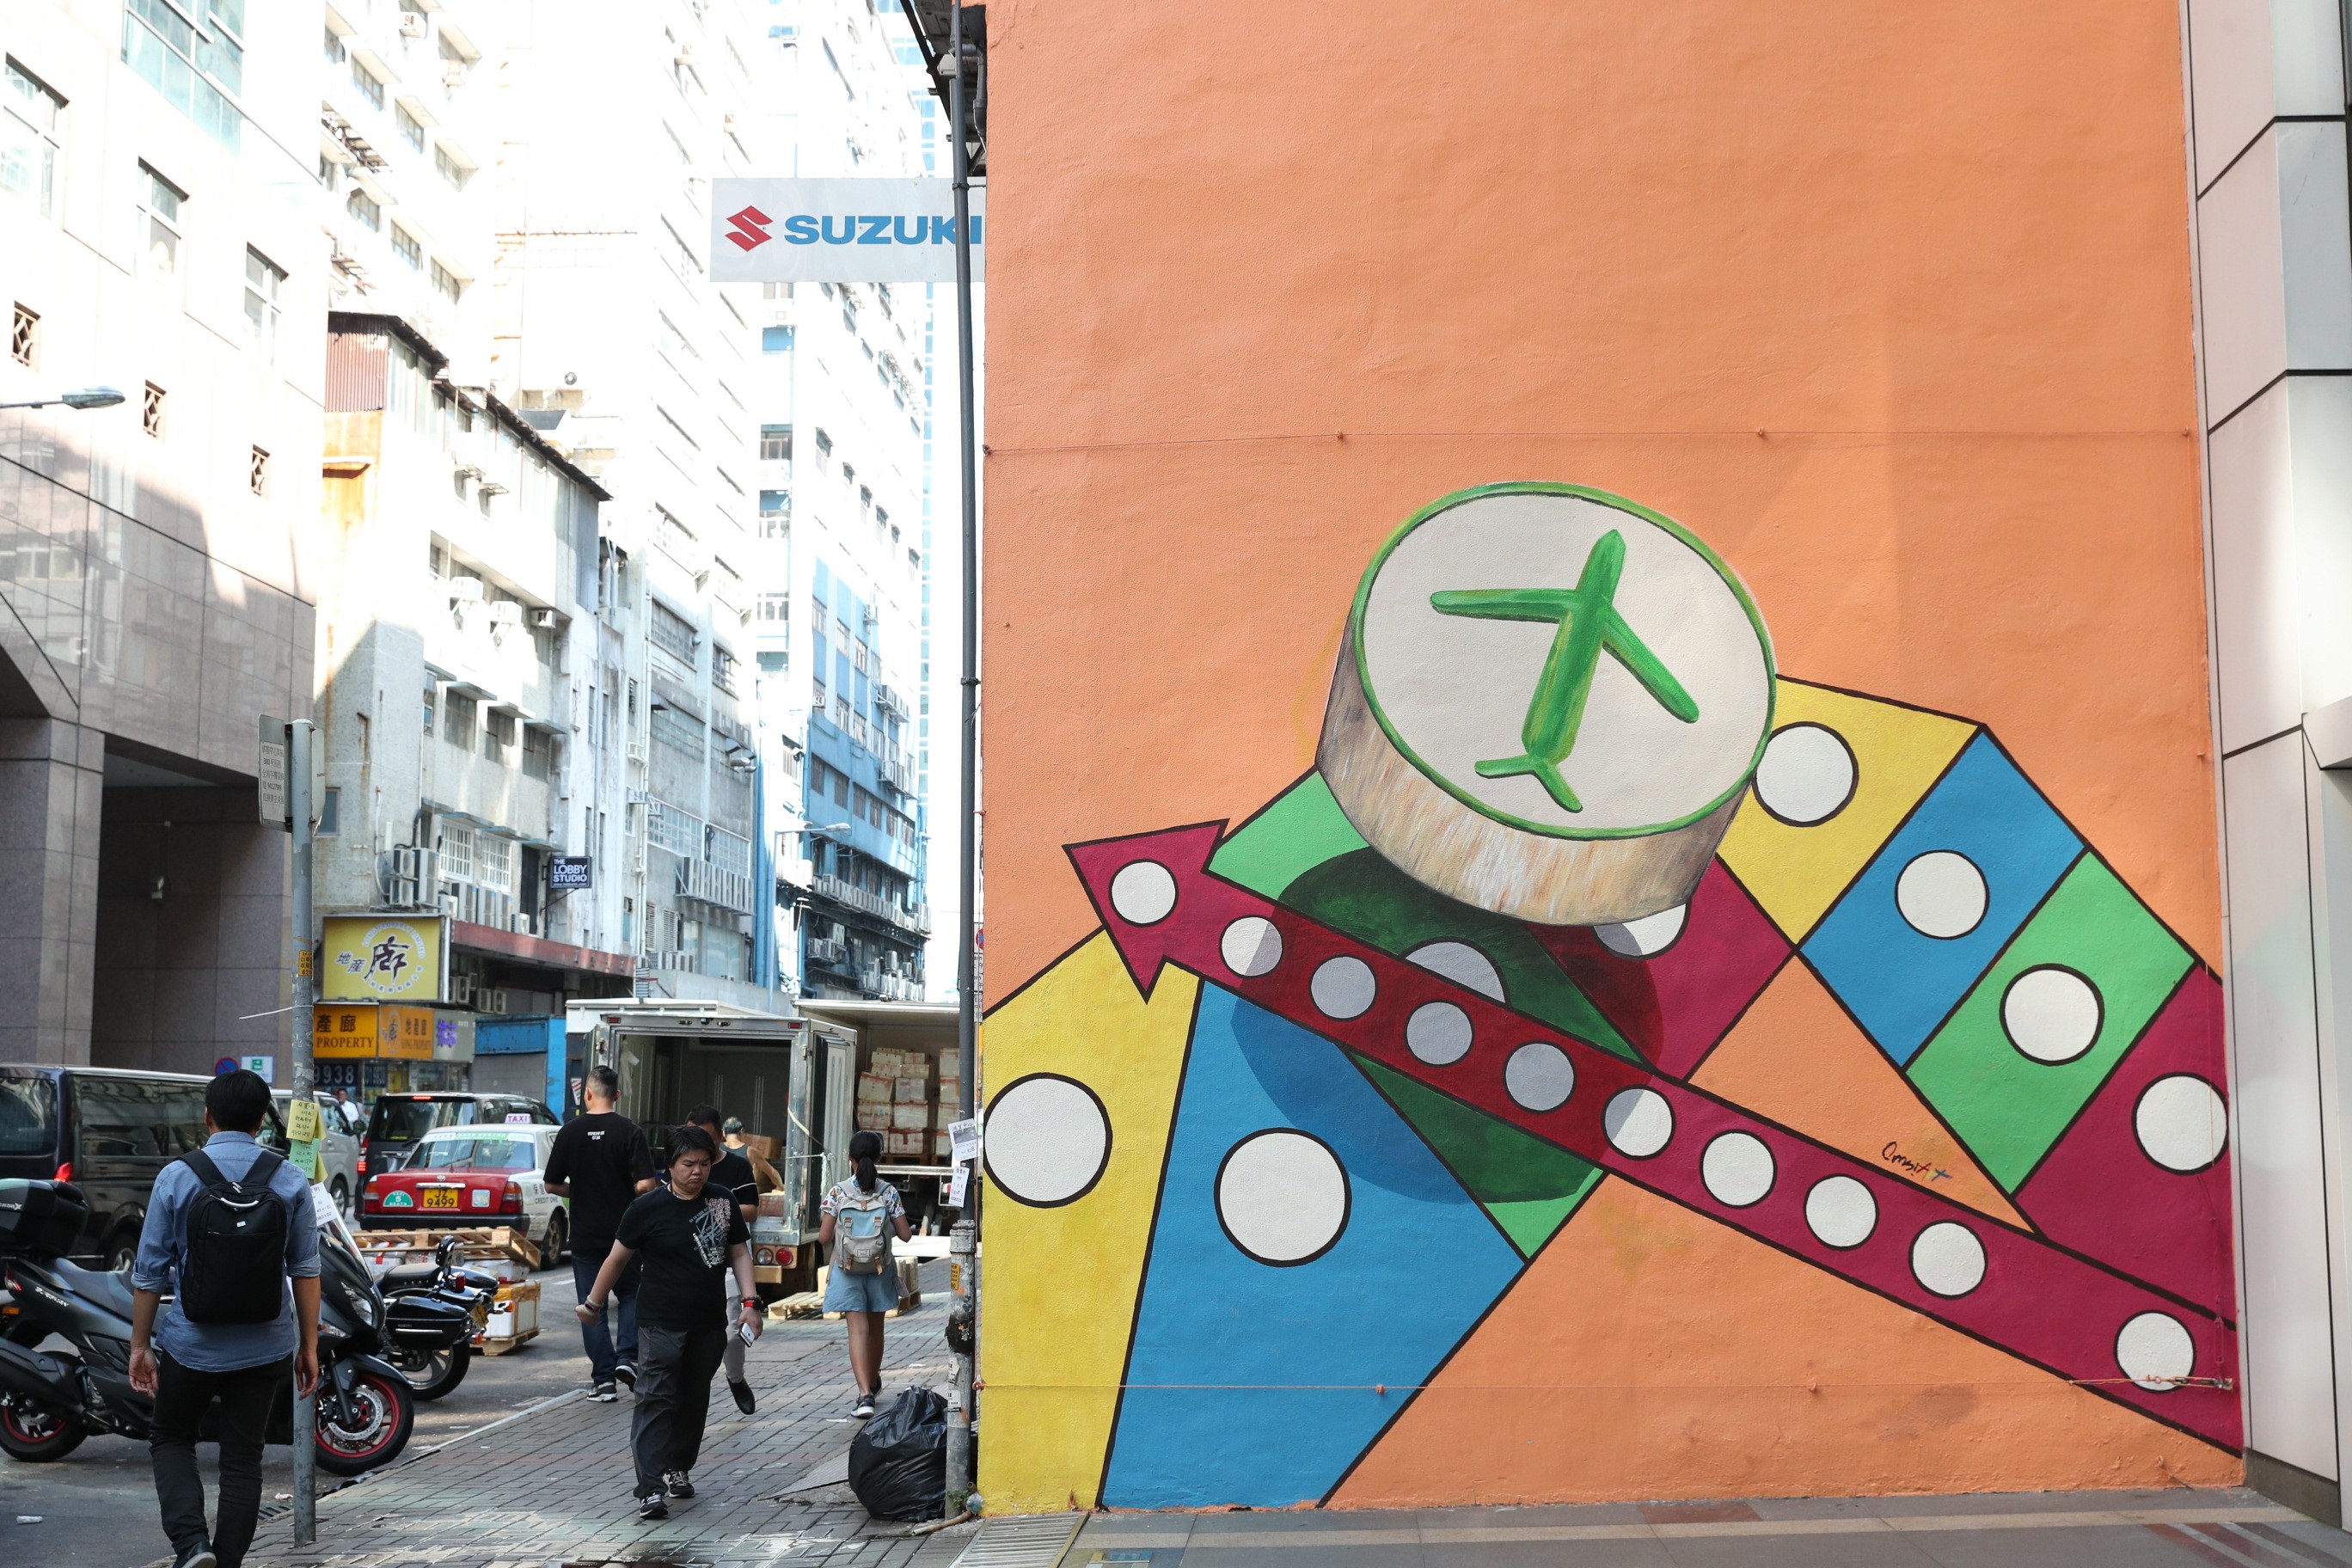 Back Alley Project@Kowloon East transforms walkways and alleys with artworks by artists from around the world.